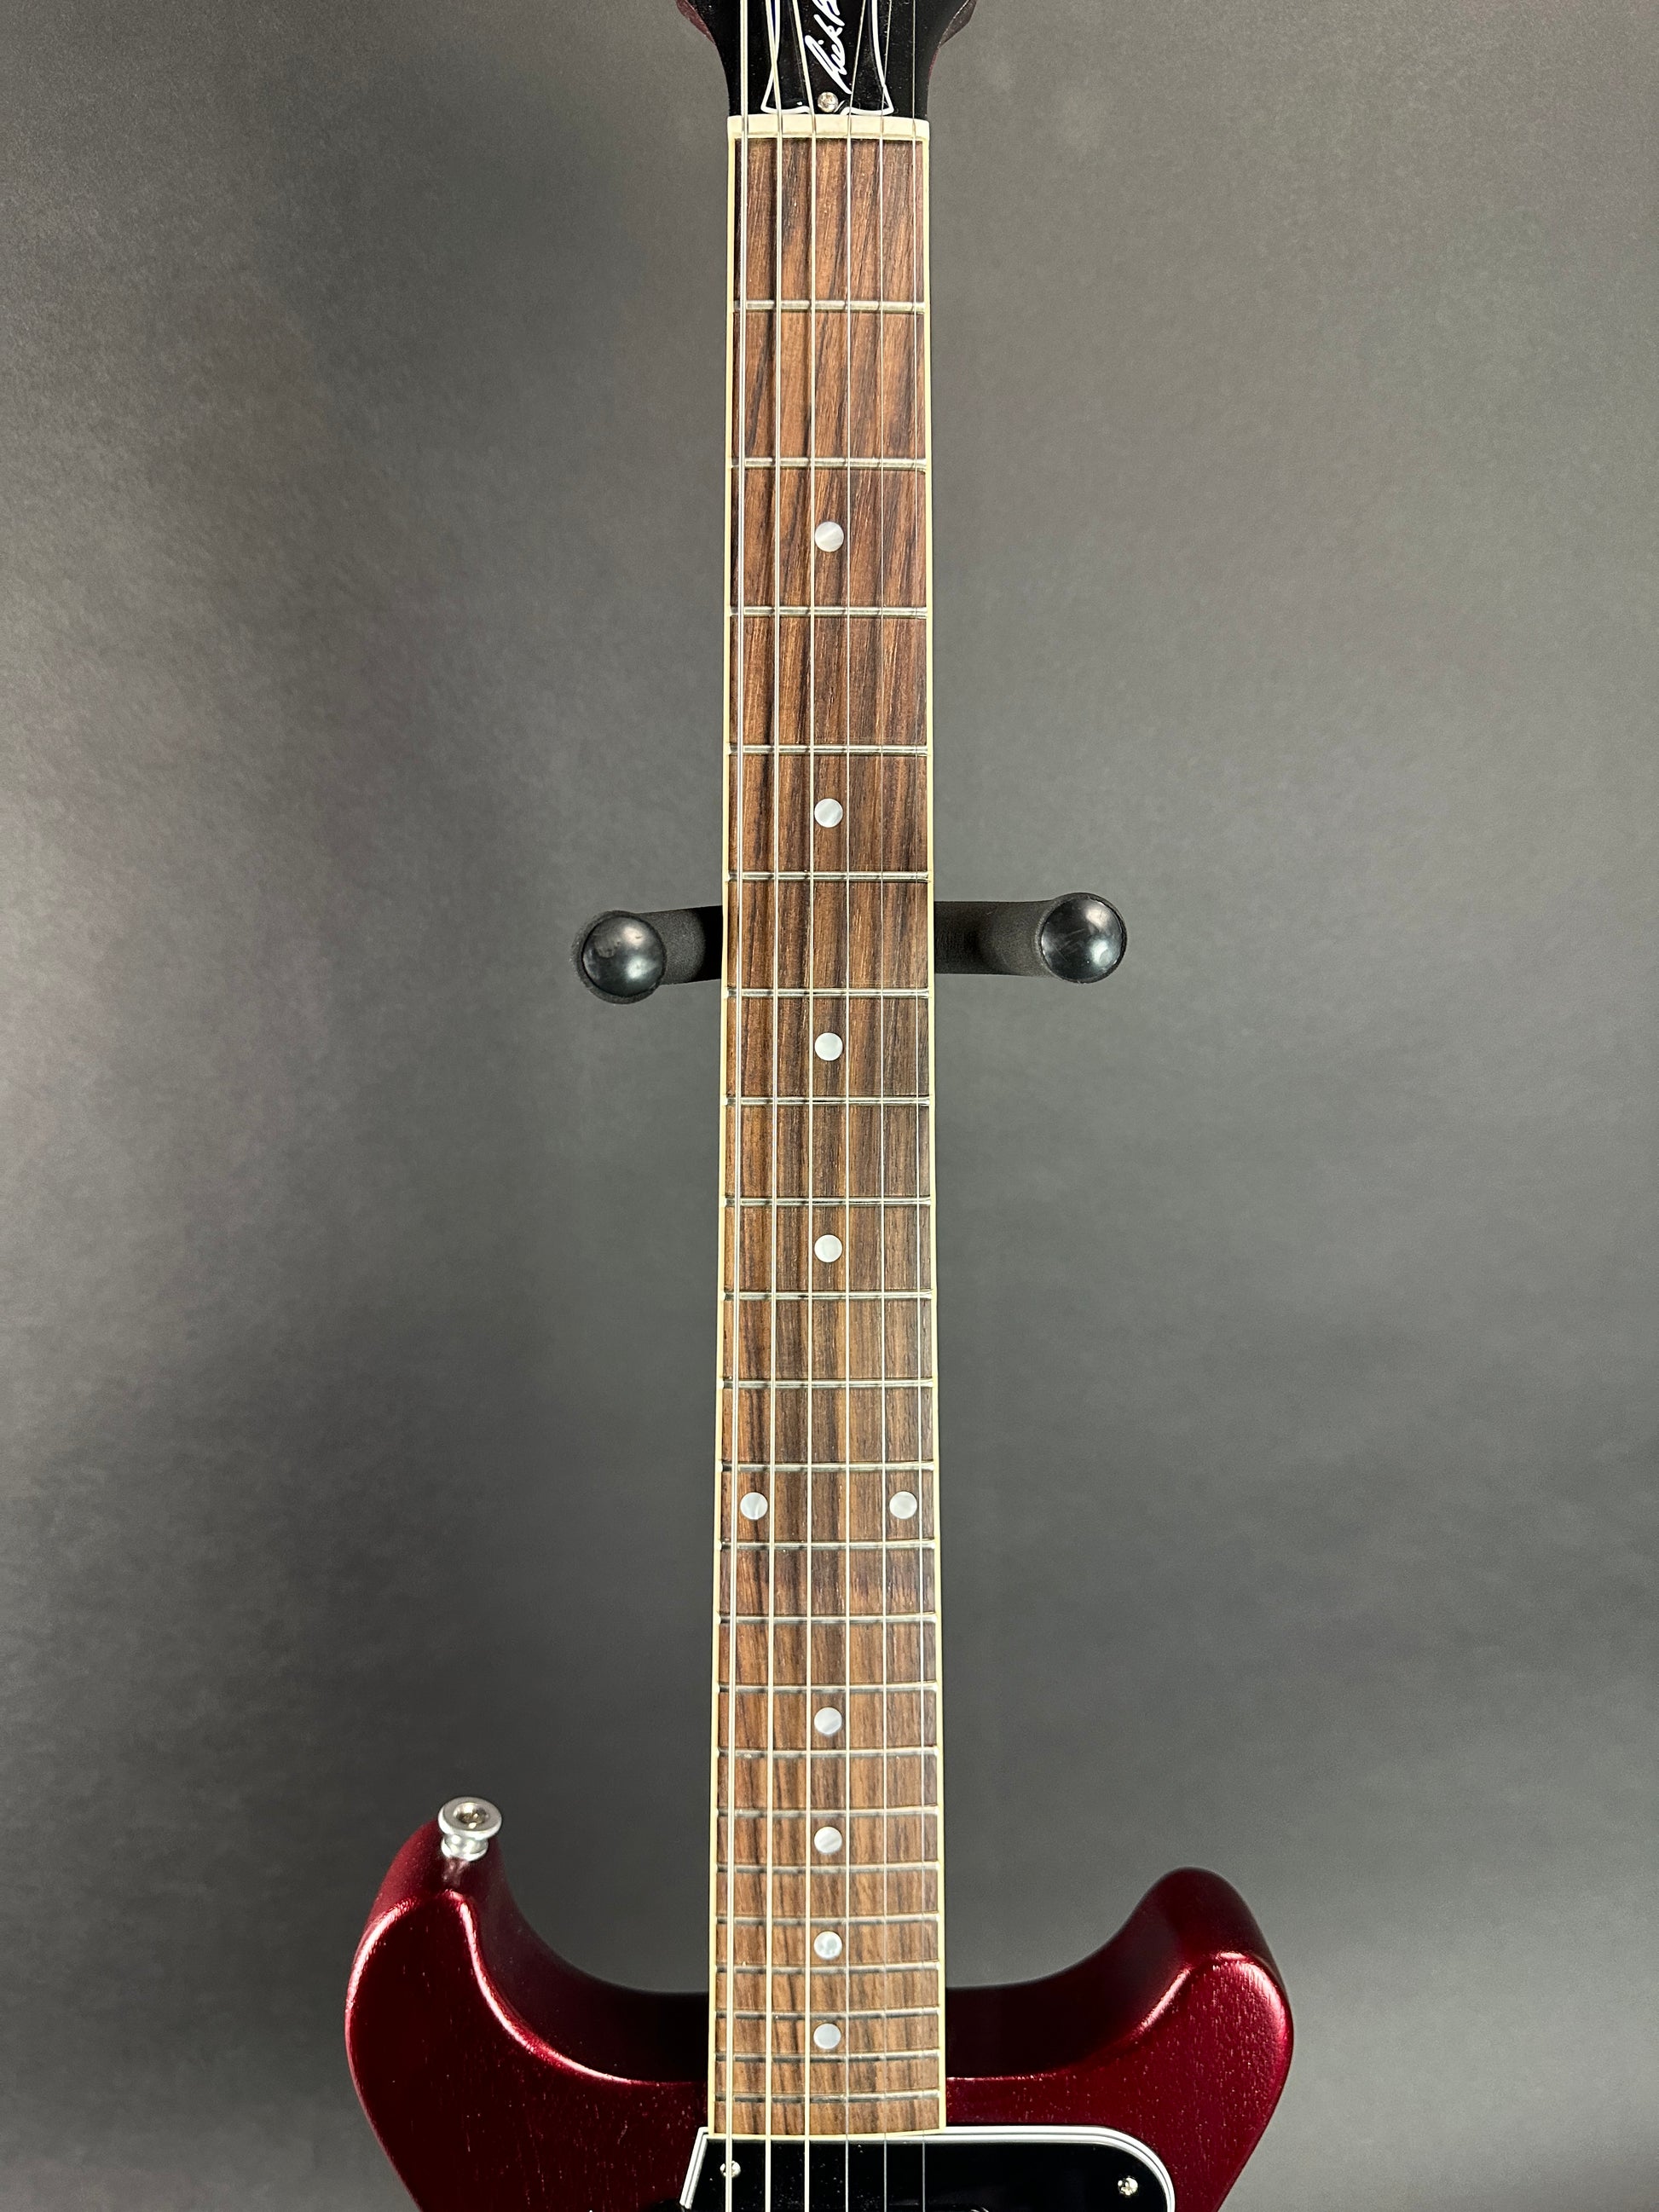 Fretboard of Used Gibson Rick Beato Les Paul Special Double Cut Cherry.